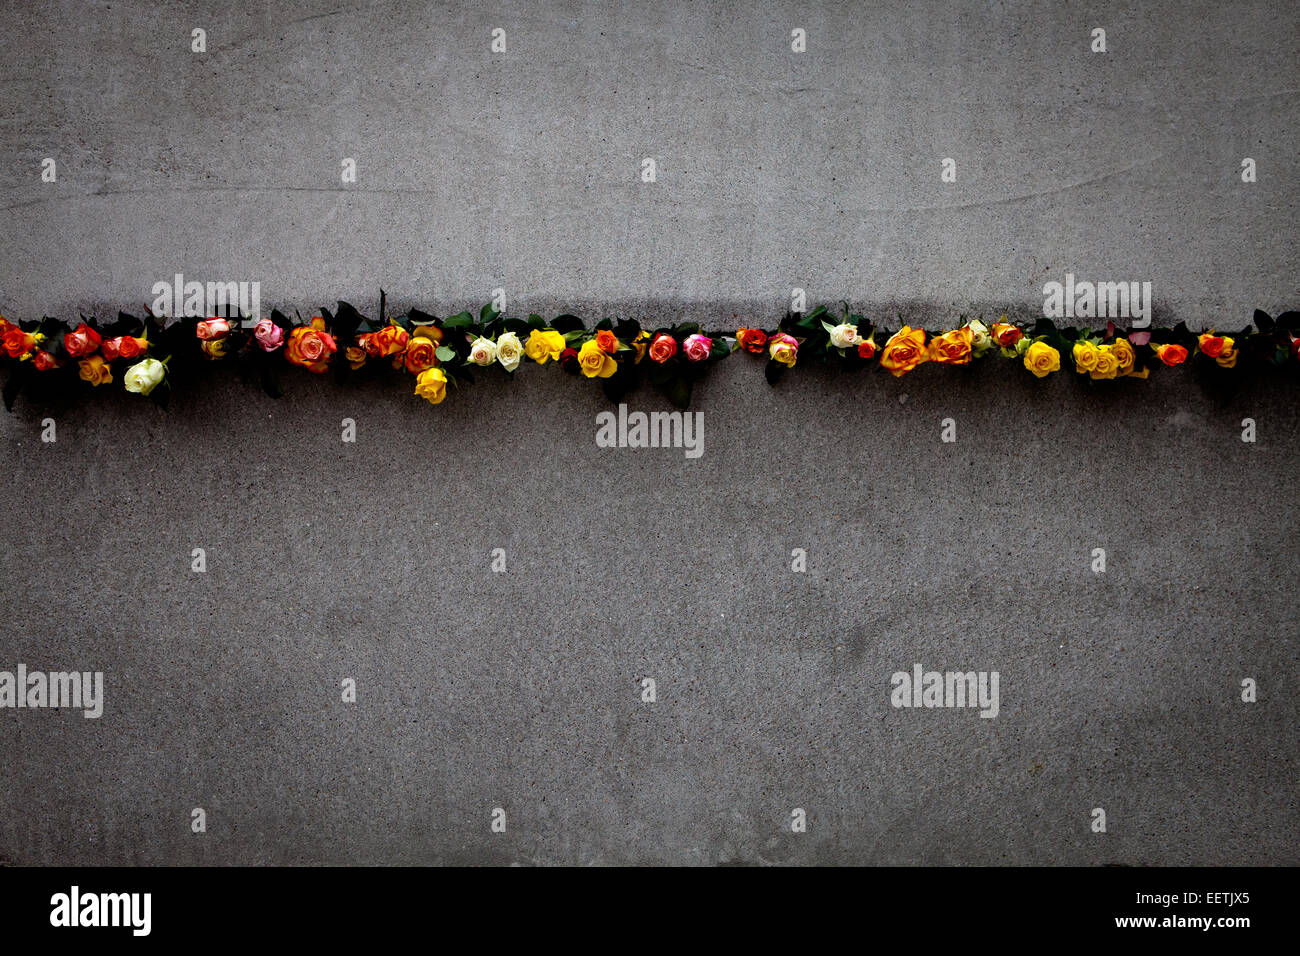 Flowers placed in the Berlin Wall during 25th commemoration of its fall Stock Photo